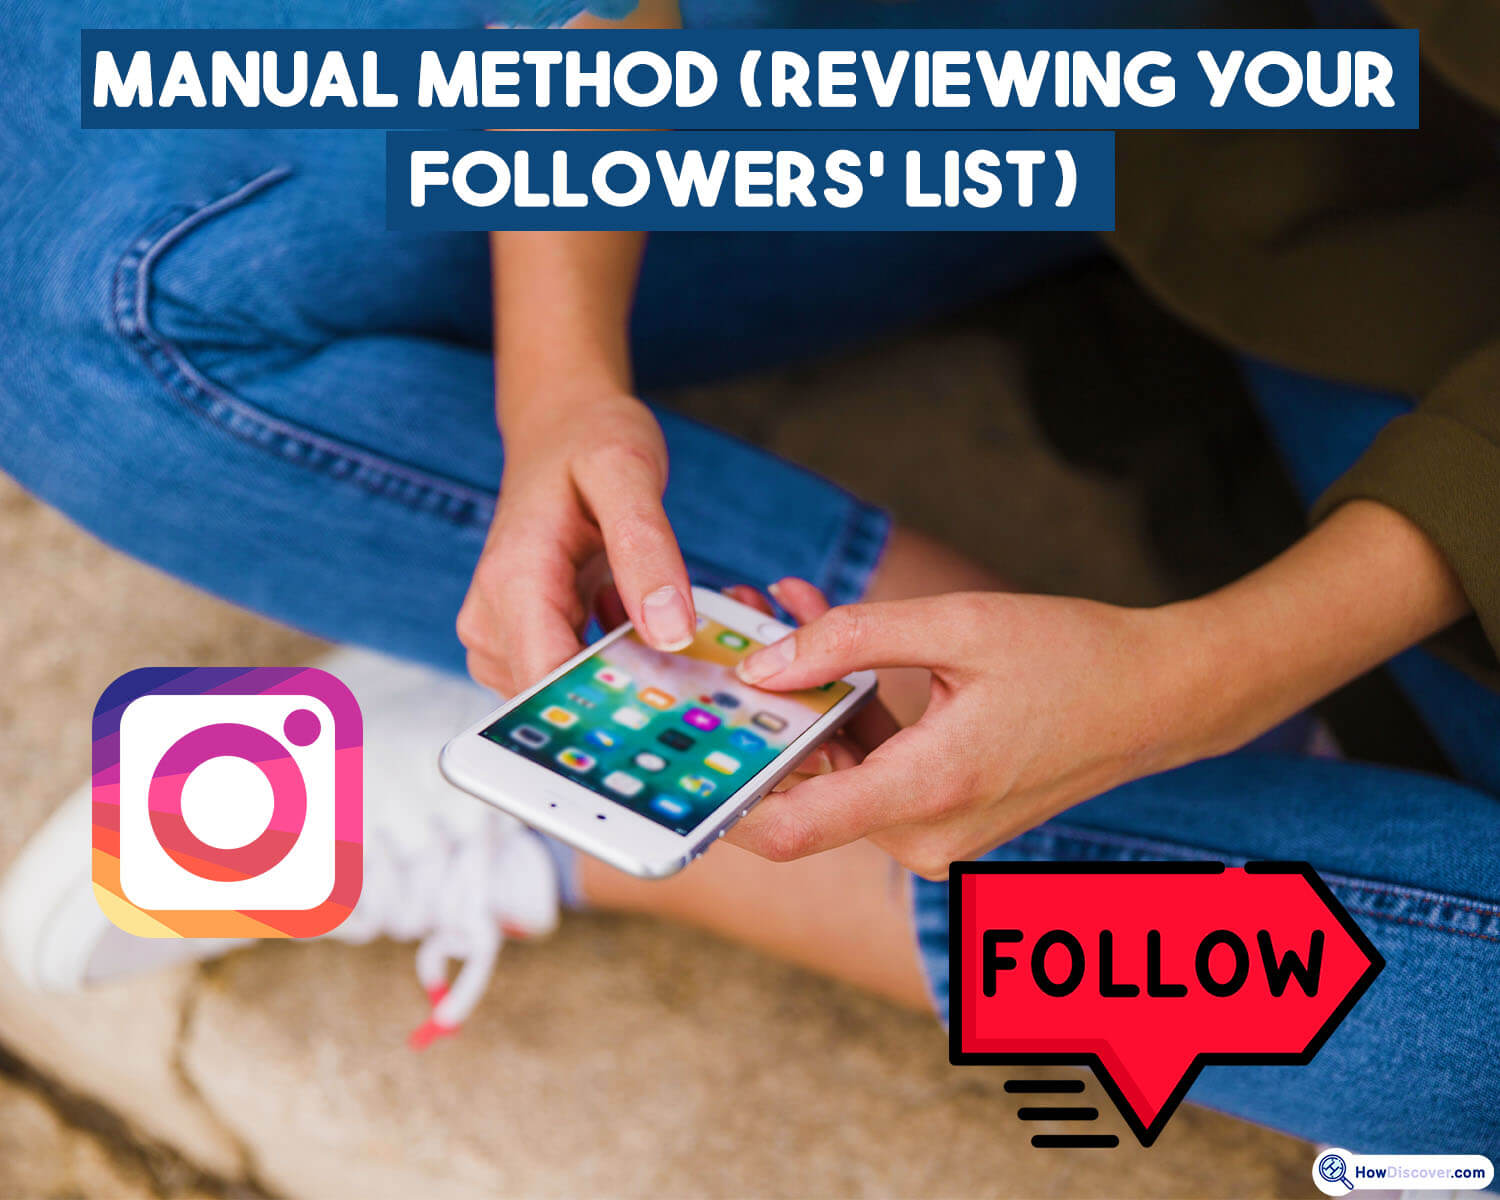 Method 1: Manual method (Reviewing your followers' list) - how to see who doesn't follow you back on Instagram 2023